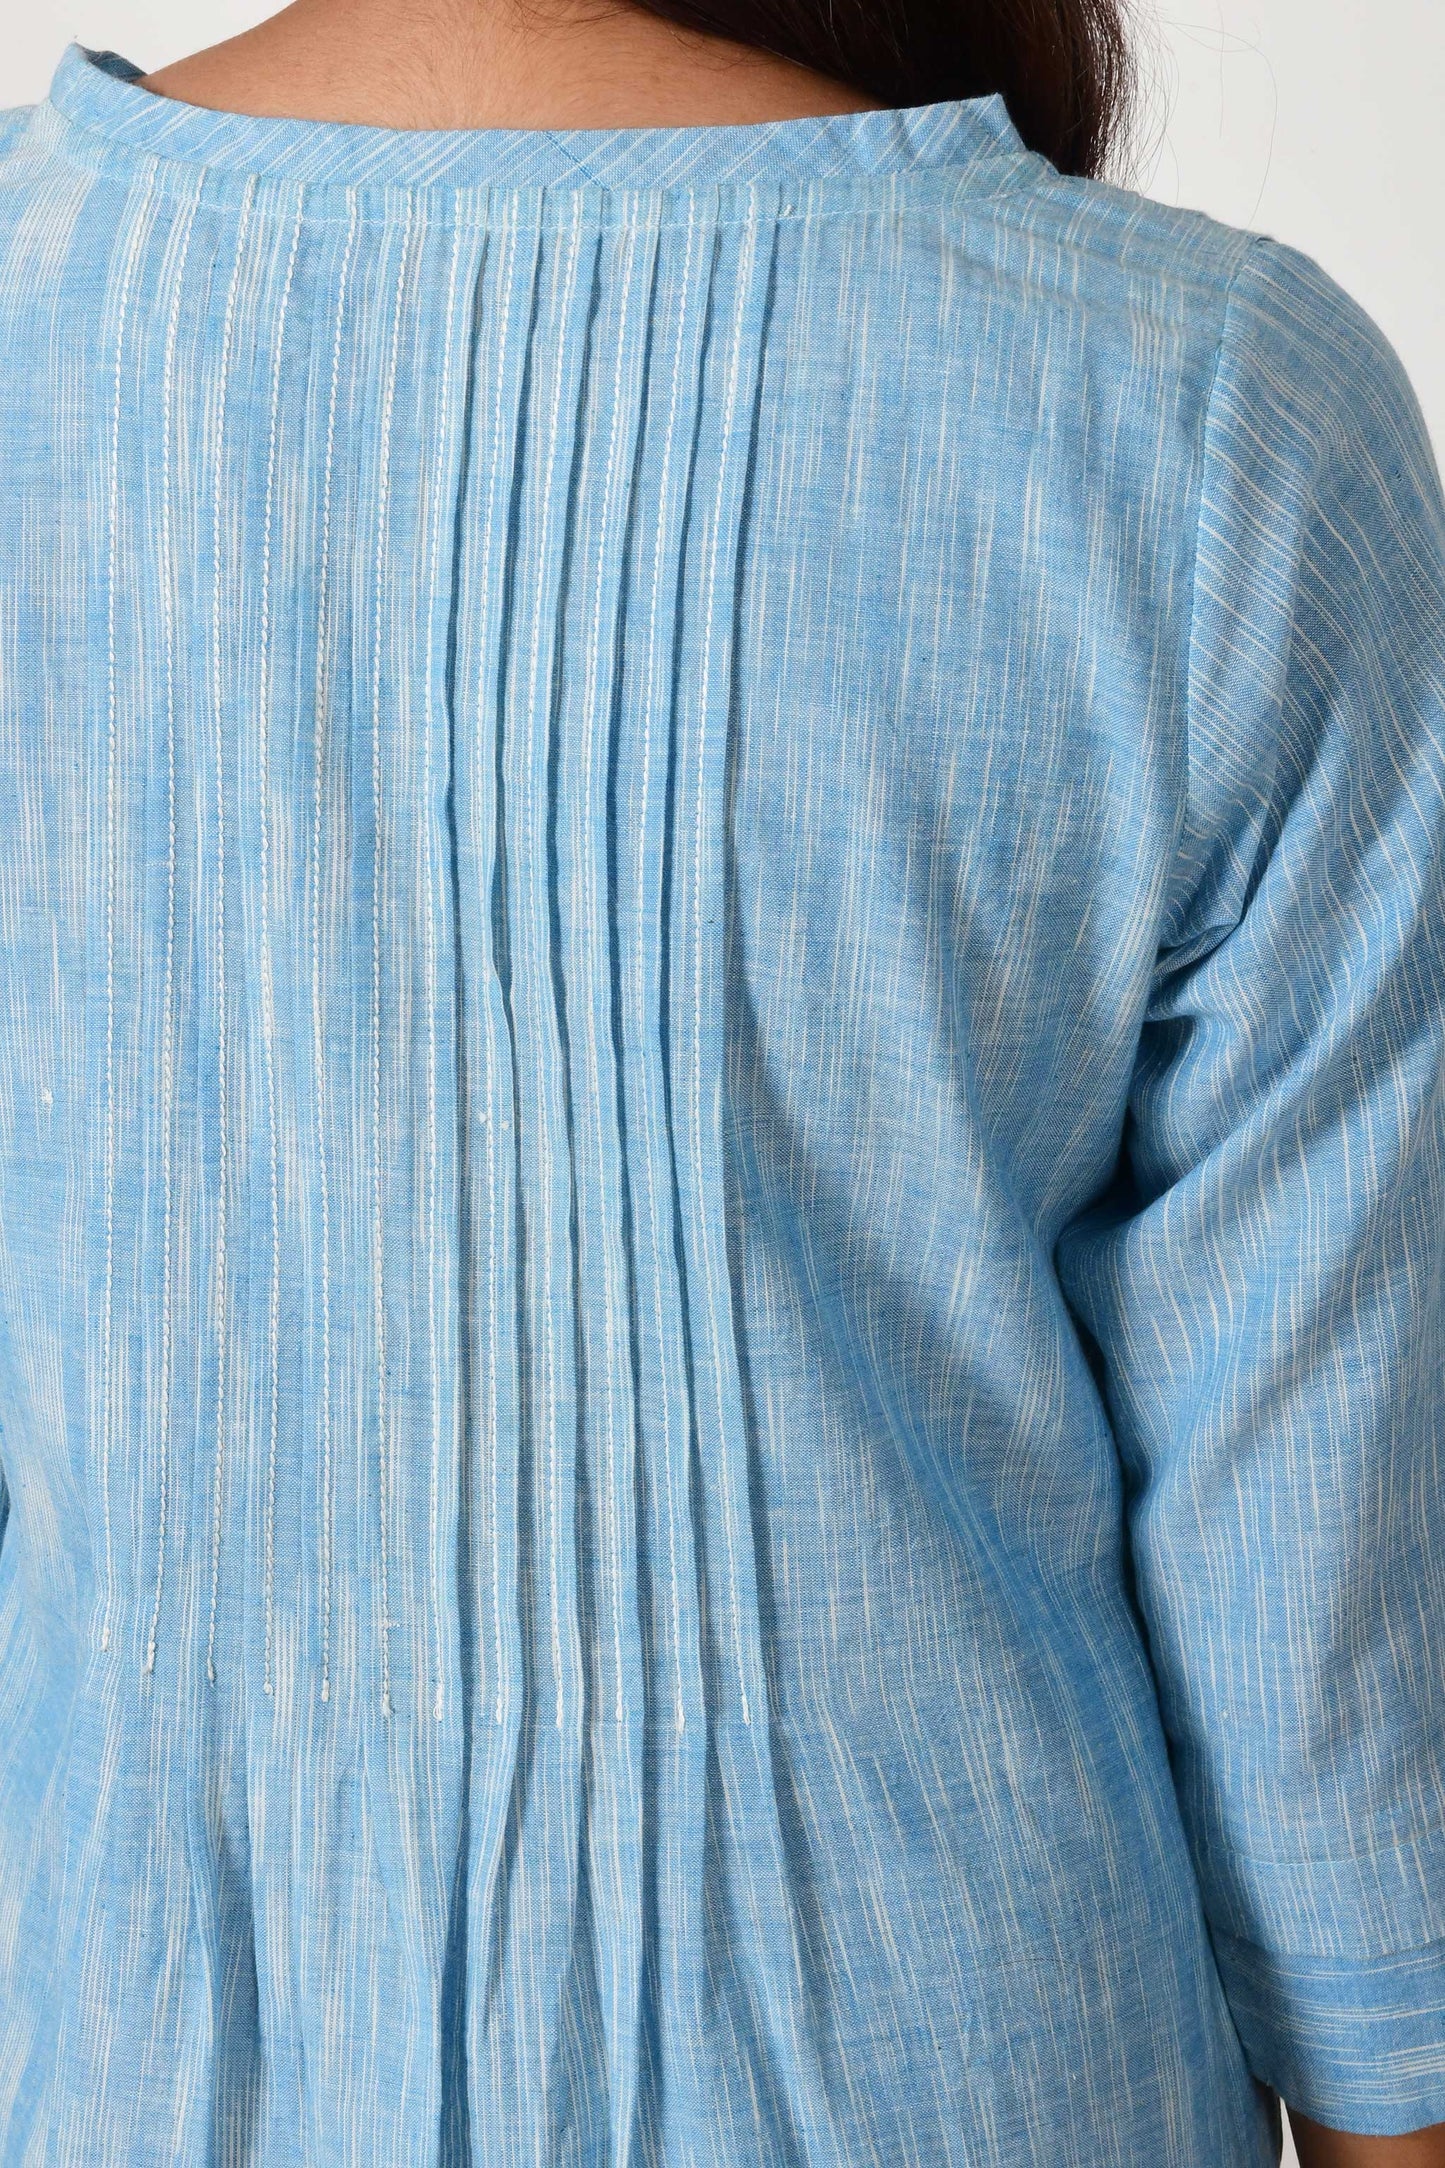 close up of knife pleats on the back of the blue textured cotton dress made of hand spun and hand woven cotton.